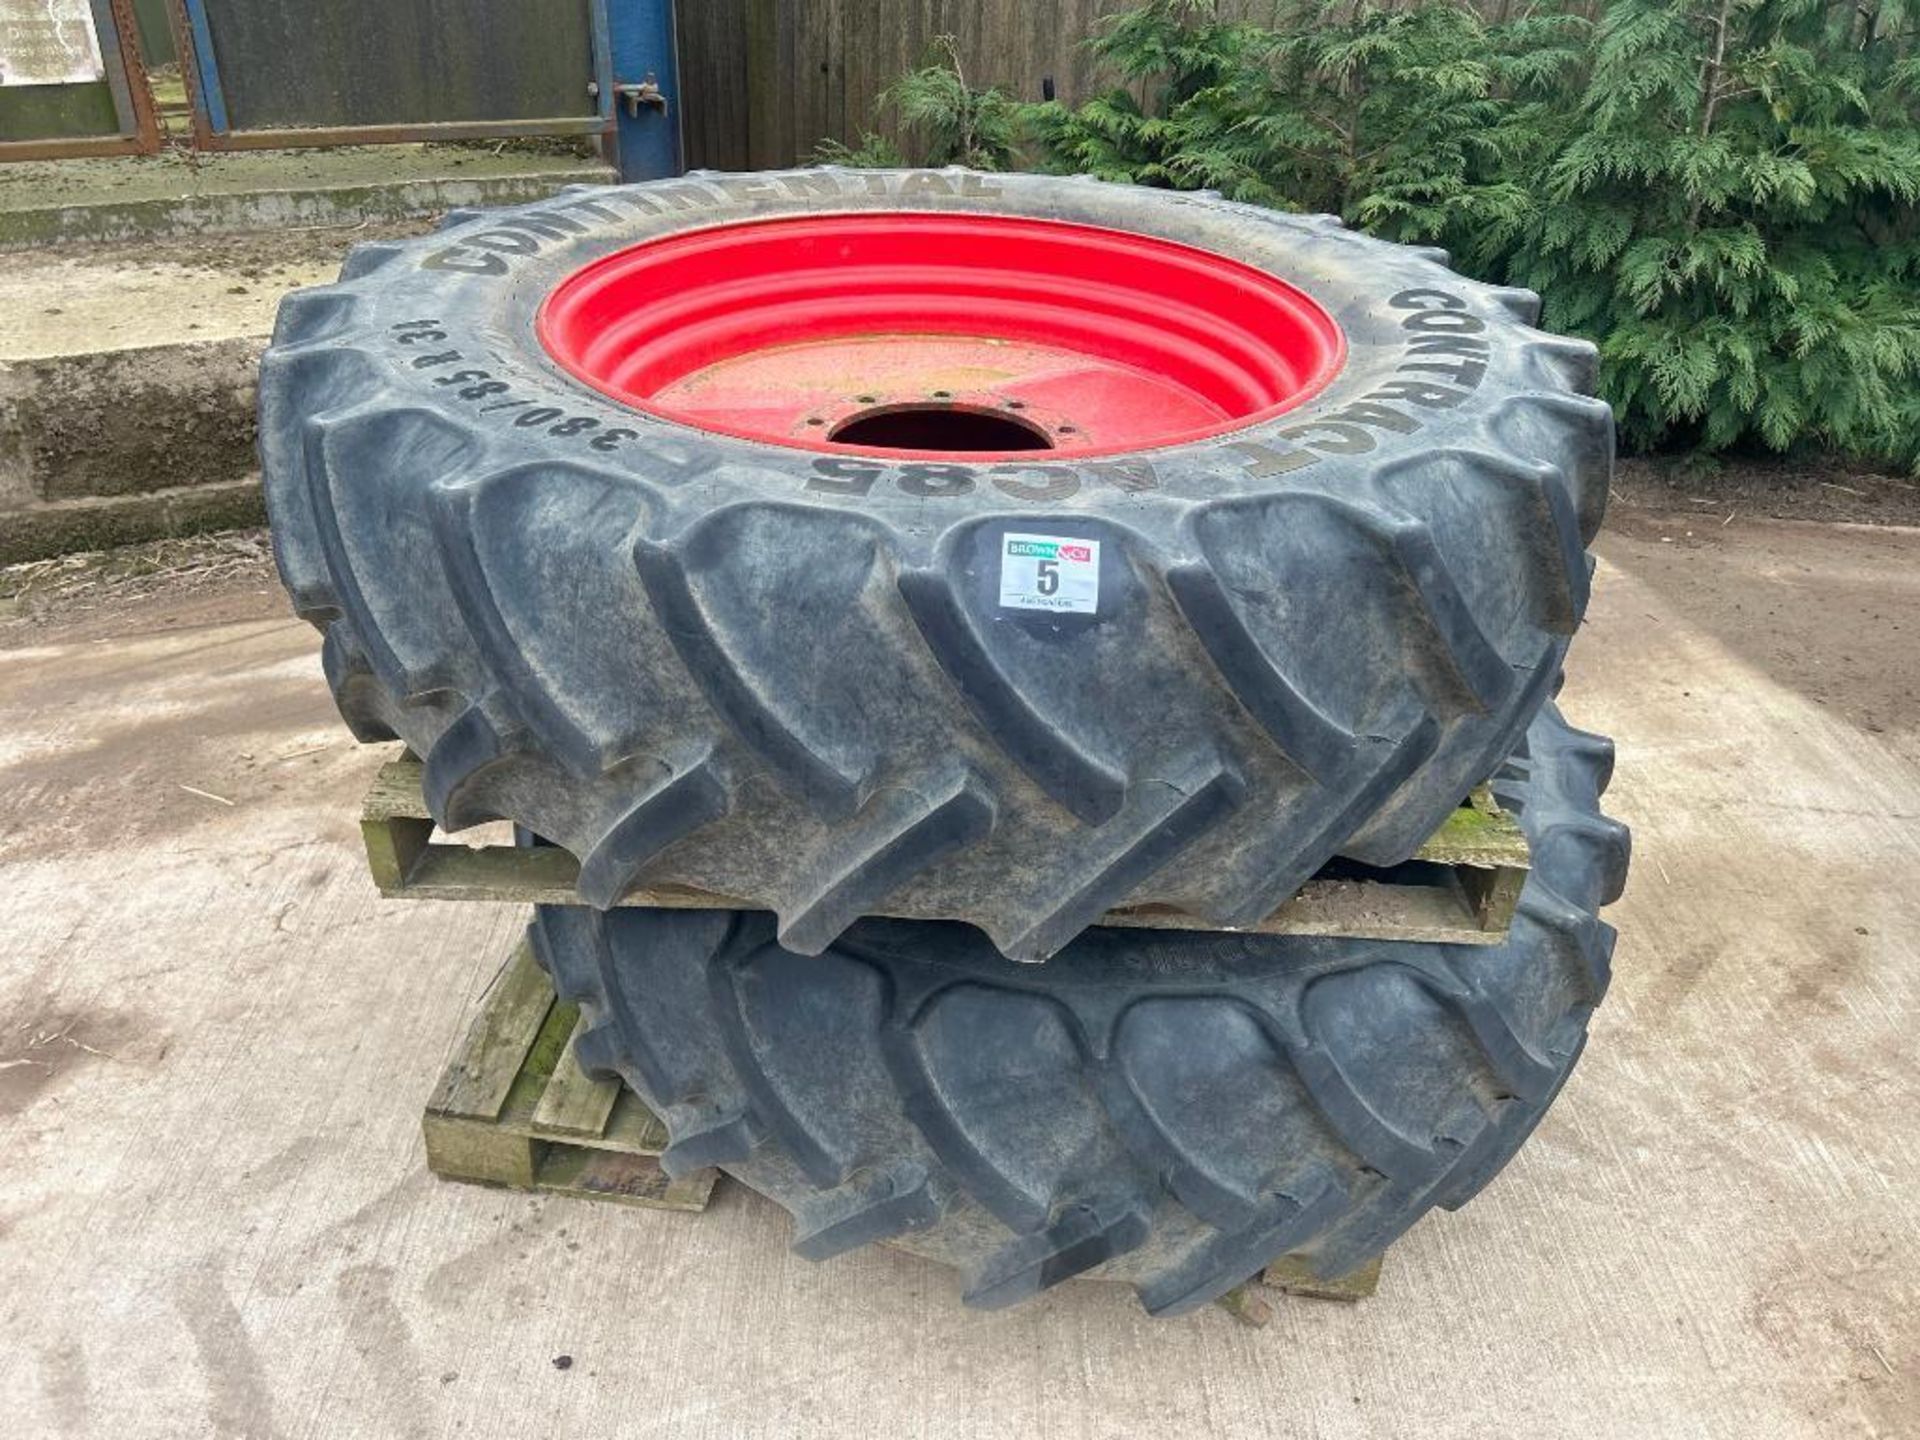 Set of 380/85R34 front and 18.4R46 rear wheels and tyres to fit Fendt 820 and 724. - Image 2 of 5